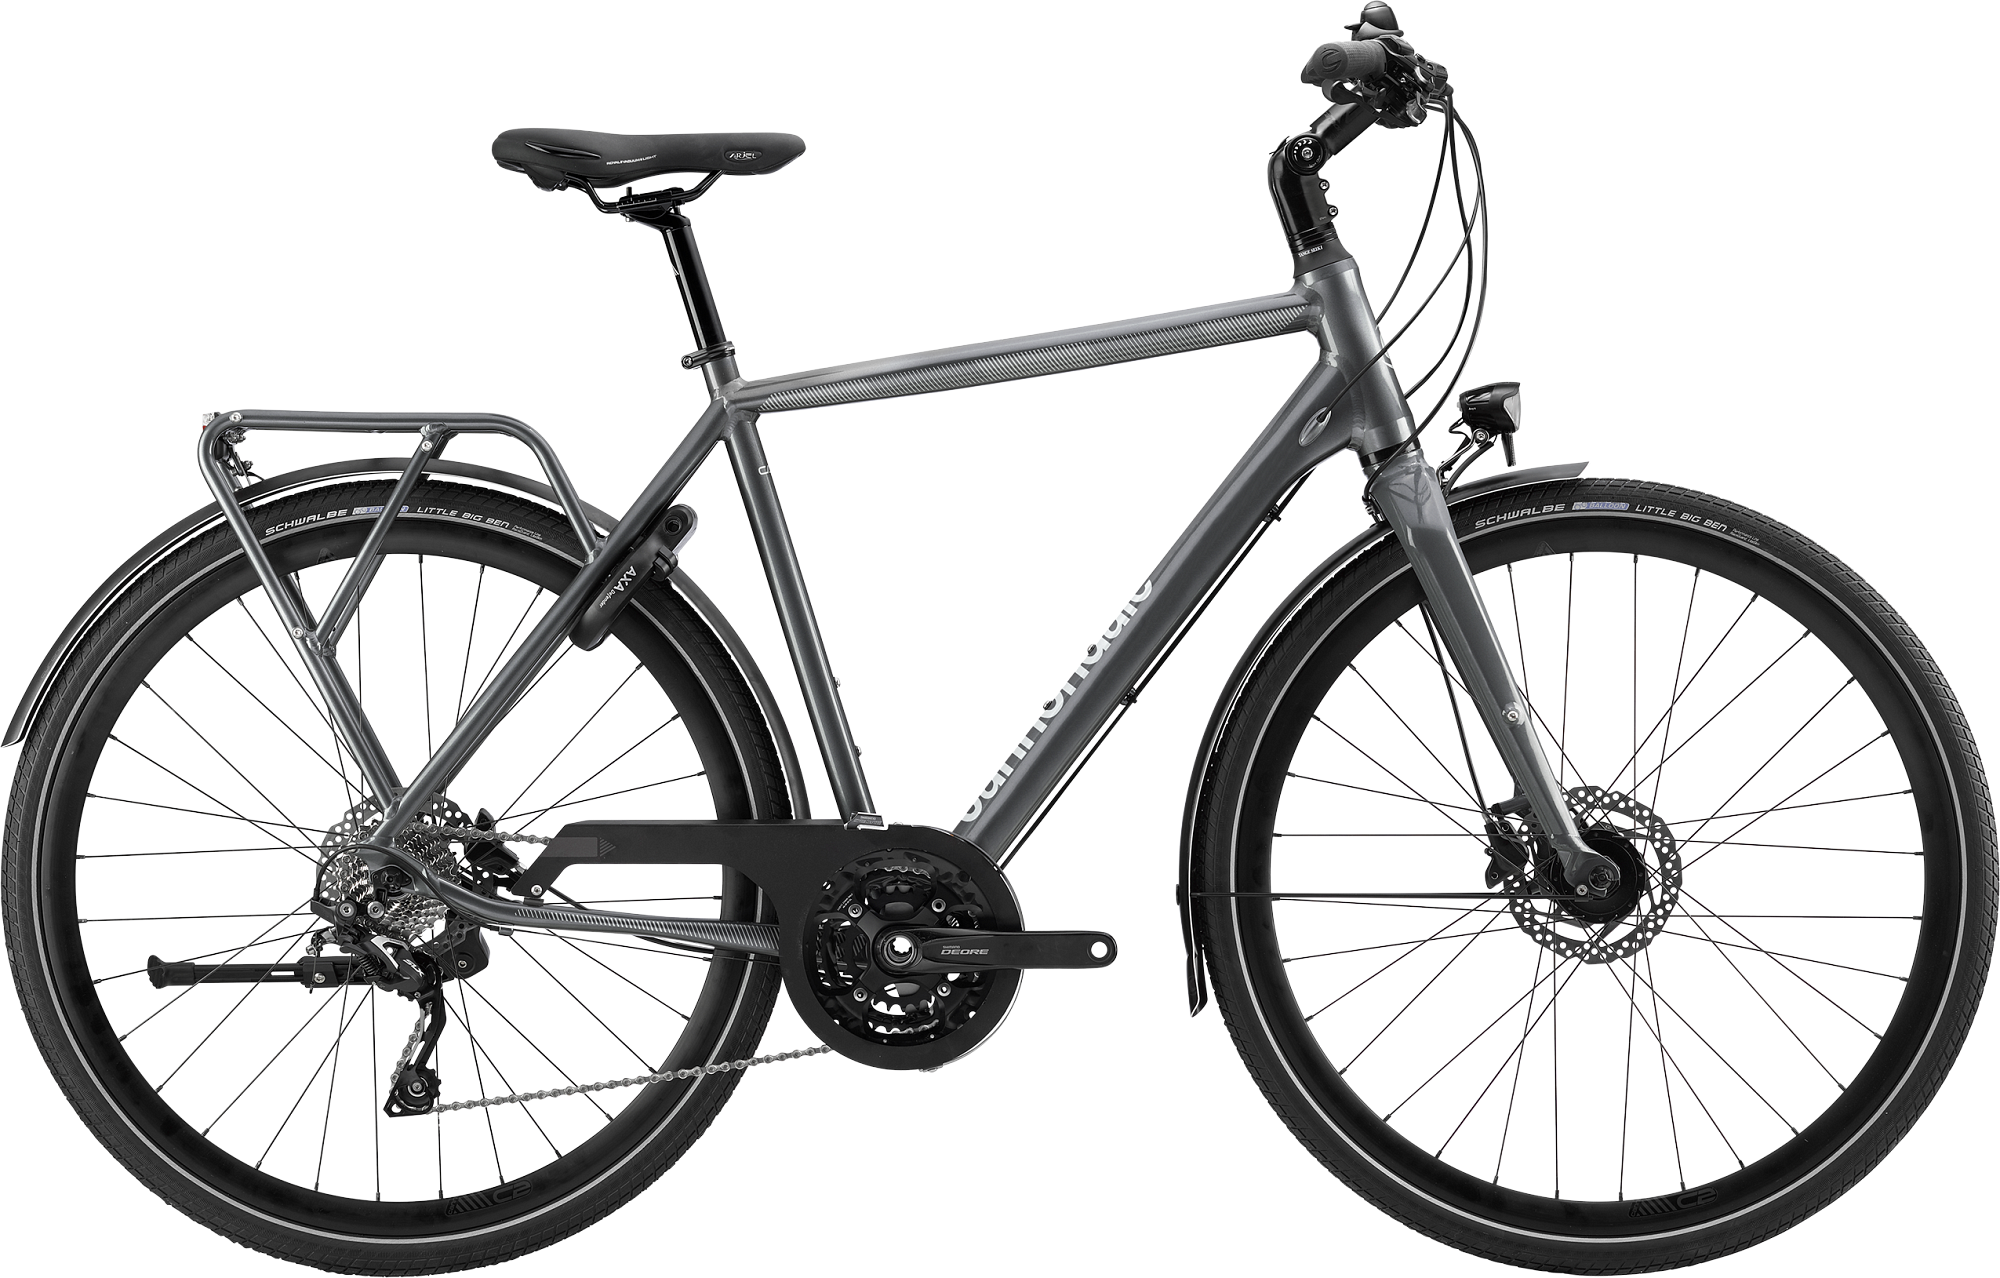 Paint for 2021 Cannondale Tesoro 2 - Gloss Charcoal Gray